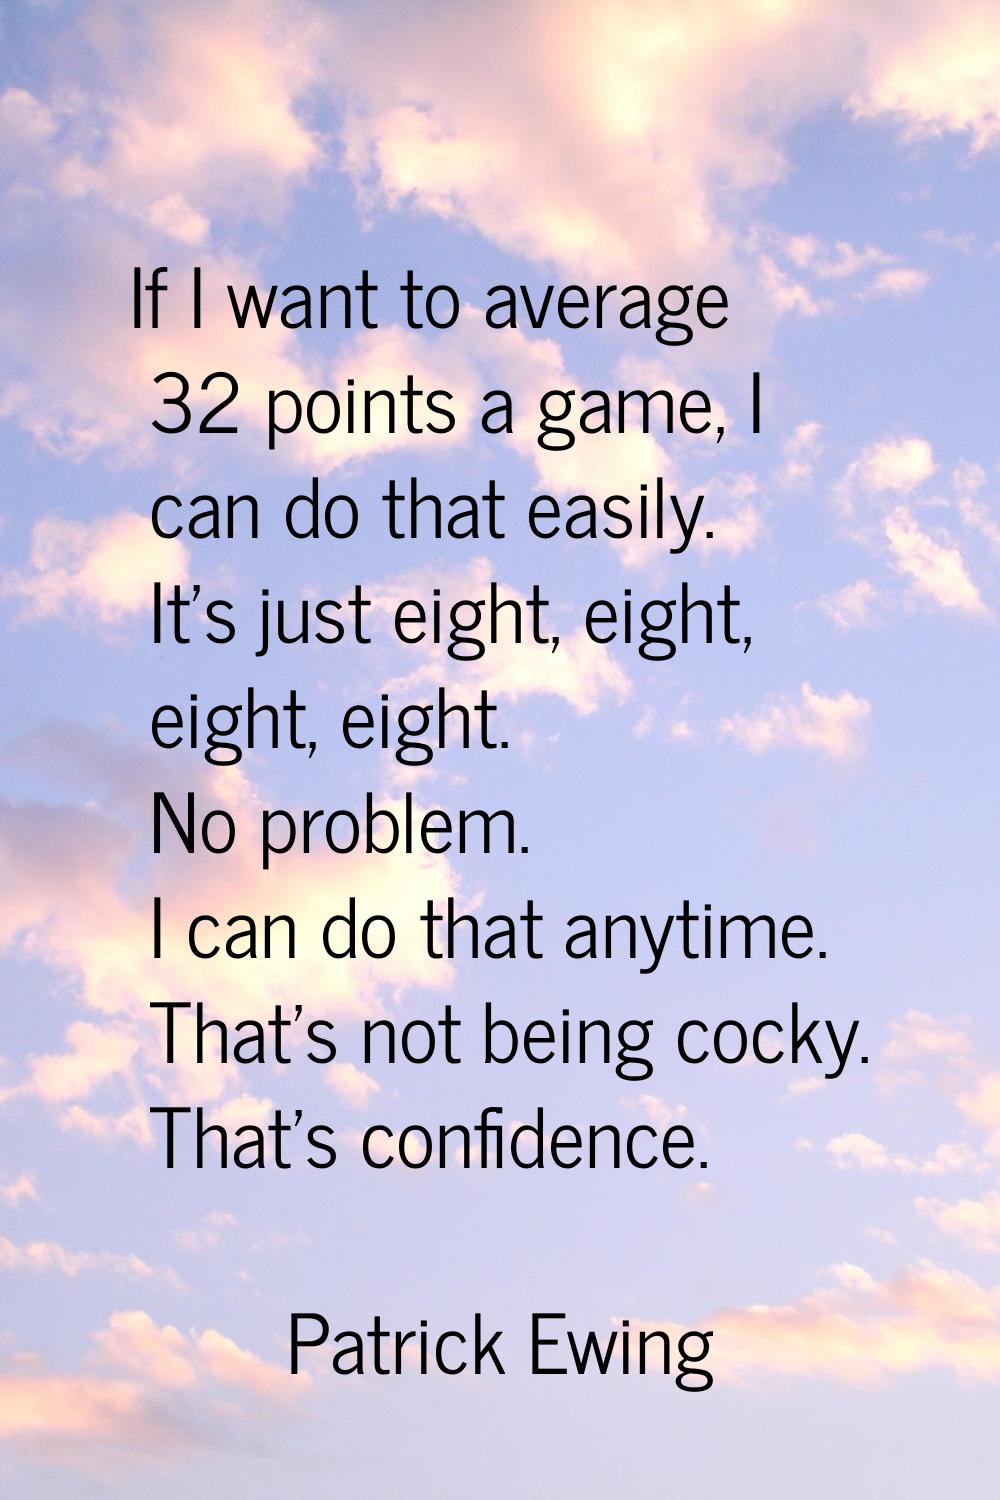 If I want to average 32 points a game, I can do that easily. It's just eight, eight, eight, eight. 